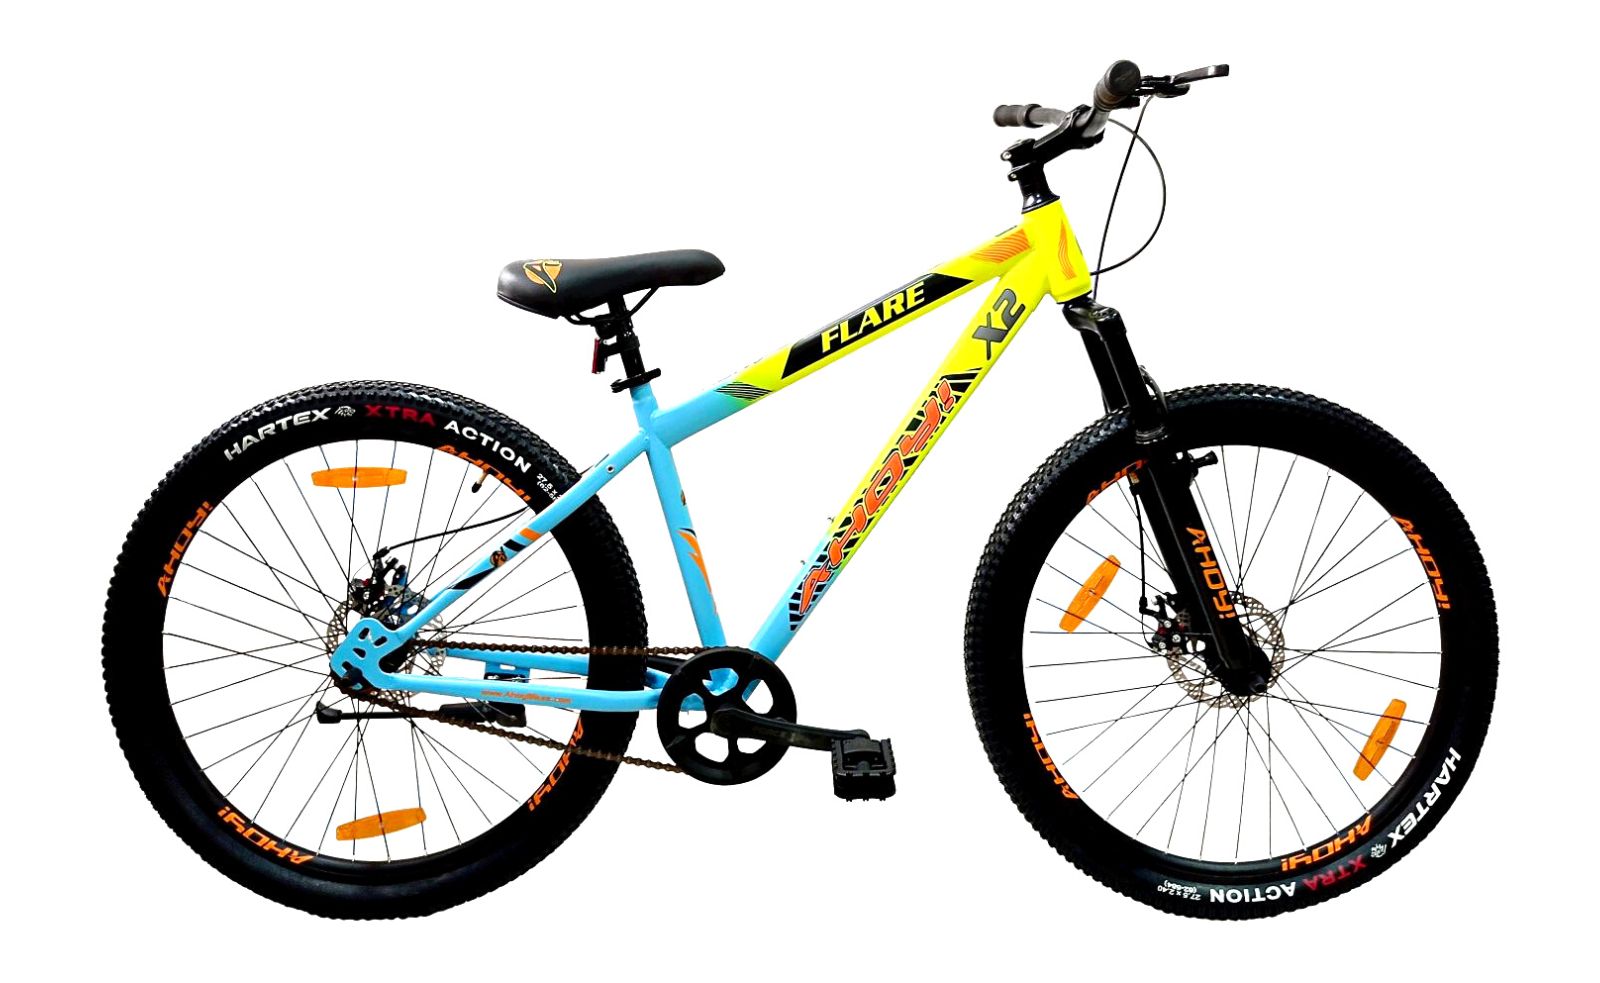 Flare Single Speed Cycle 27.5T | Buy Yellow Non Gear Bike for Men